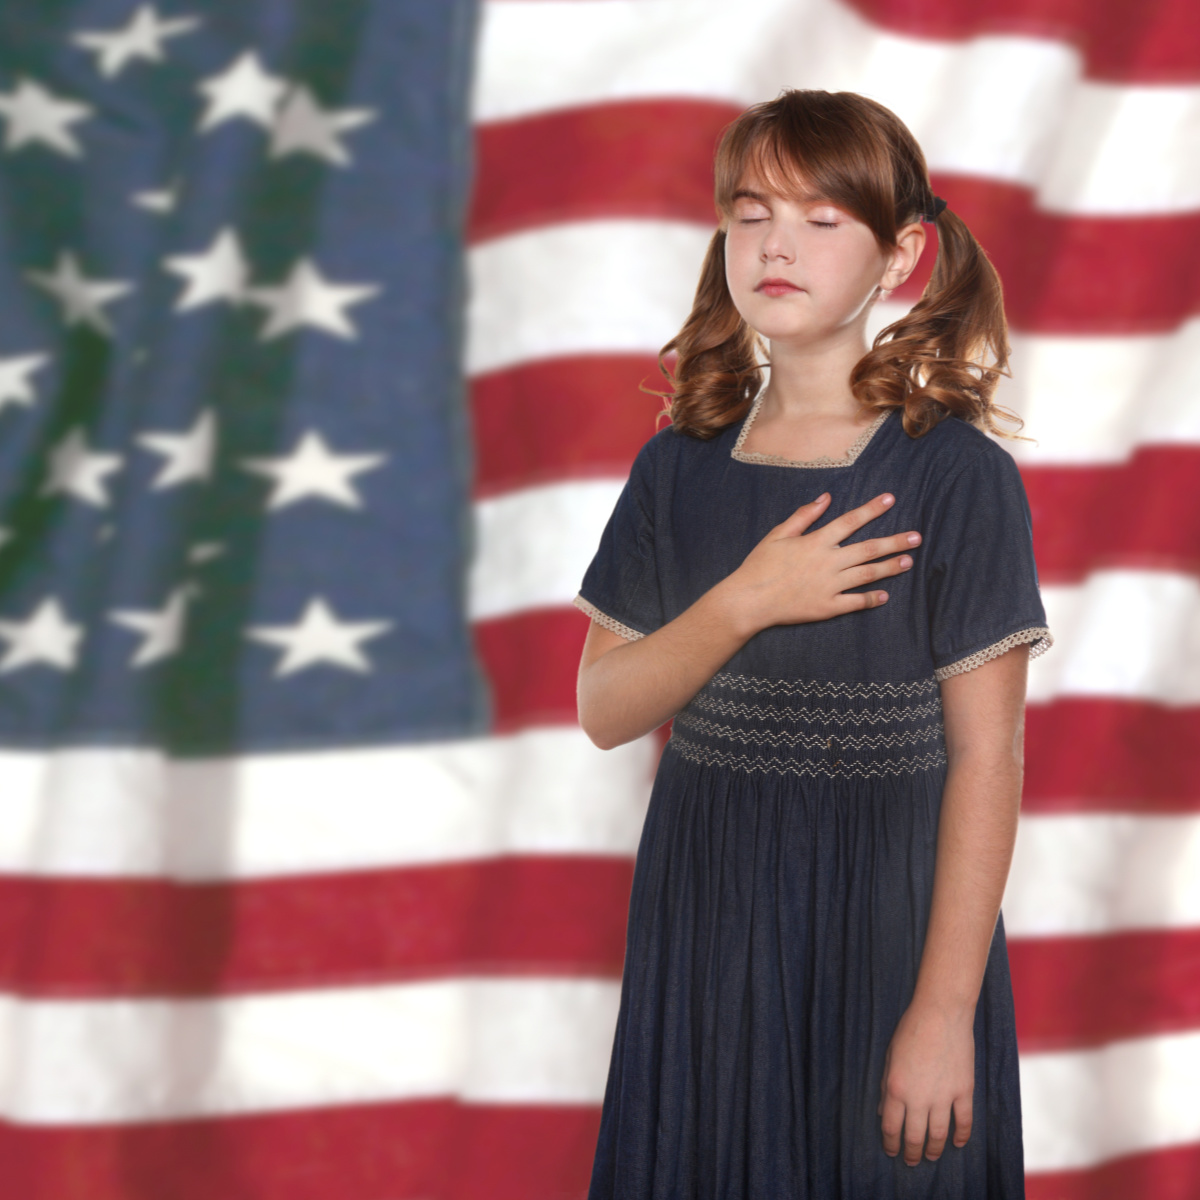 civics education teach your kids about the right to vote Independence Day 4th of July